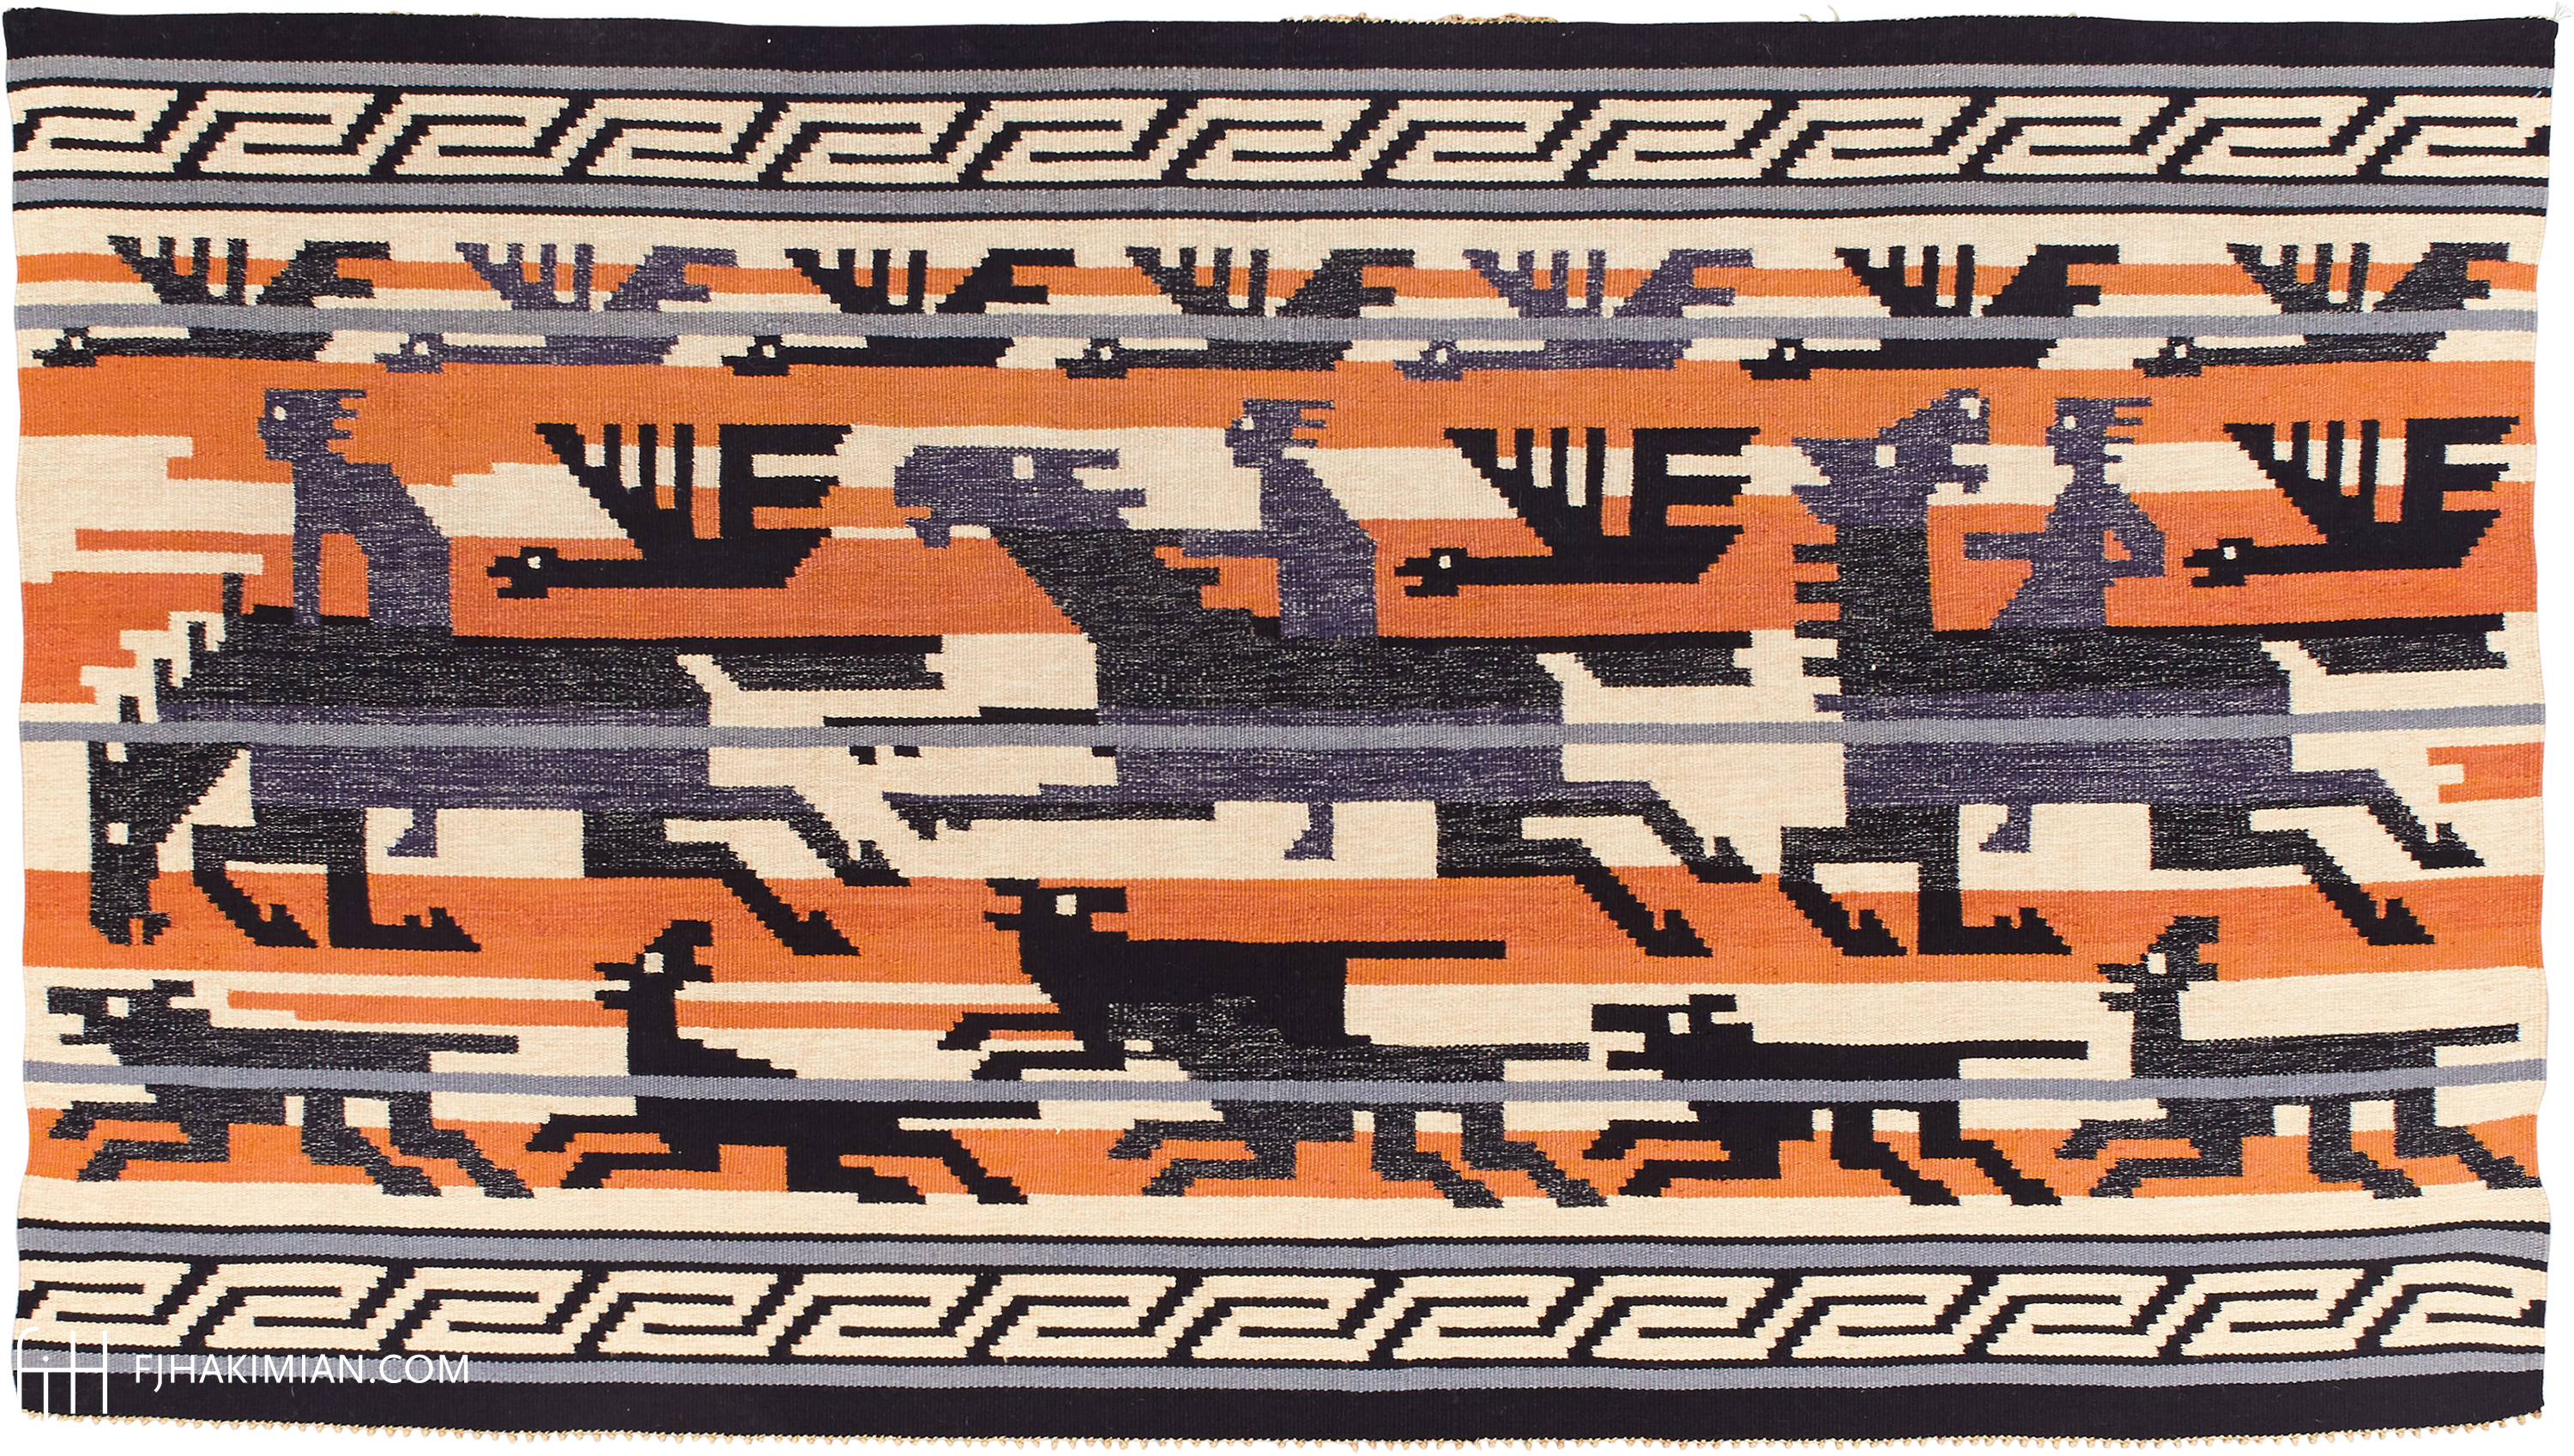 Swedish Tapestry By Maas-Fjetterstrom | FJ Hakimian | Carpet Gallery in NYC